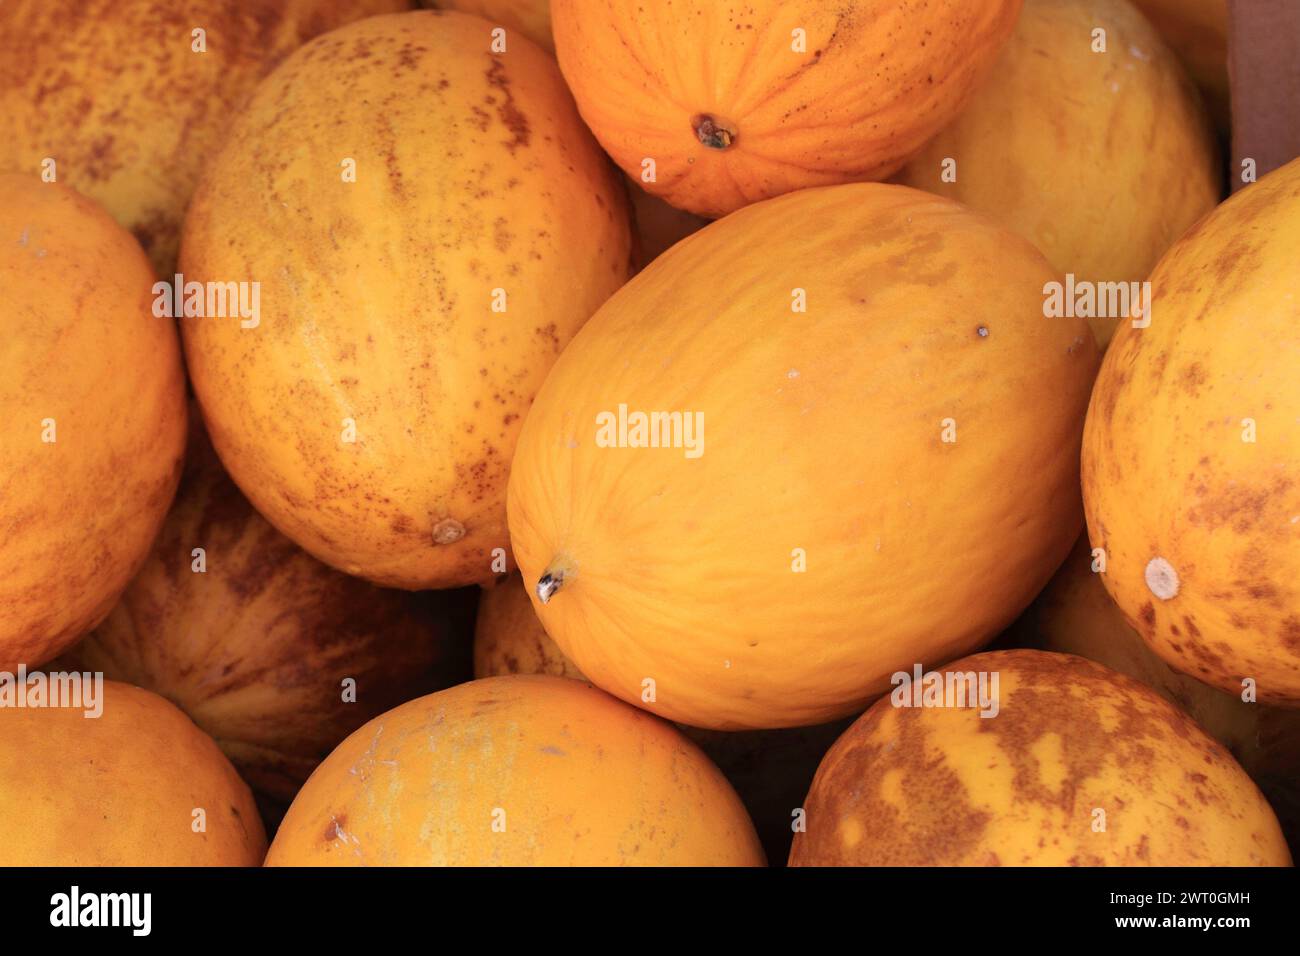 yellow melons fruit as natural food background Stock Photo